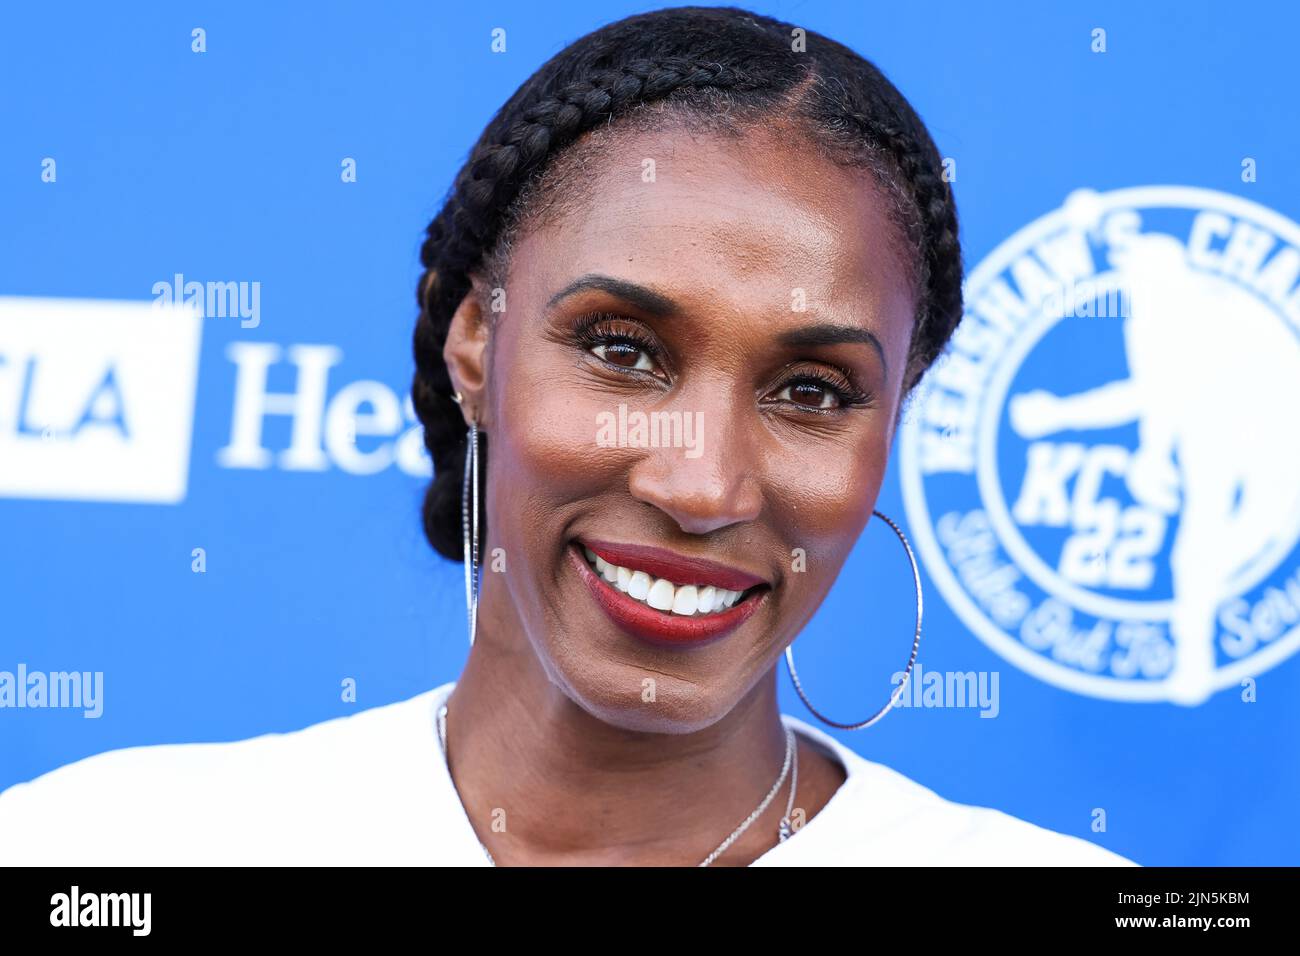 Los Angeles, United States. 08th Aug, 2022. ELYSIAN PARK, LOS ANGELES, CALIFORNIA, USA - AUGUST 08: American former professional basketball player Lisa Leslie arrives at Kershaw's Challenge Ping Pong 4 Purpose 2022 held at Dodger Stadium on August 8, 2022 in Elysian Park, Los Angeles, California, United States. (Photo by Xavier Collin/Image Press Agency) Credit: Image Press Agency/Alamy Live News Stock Photo